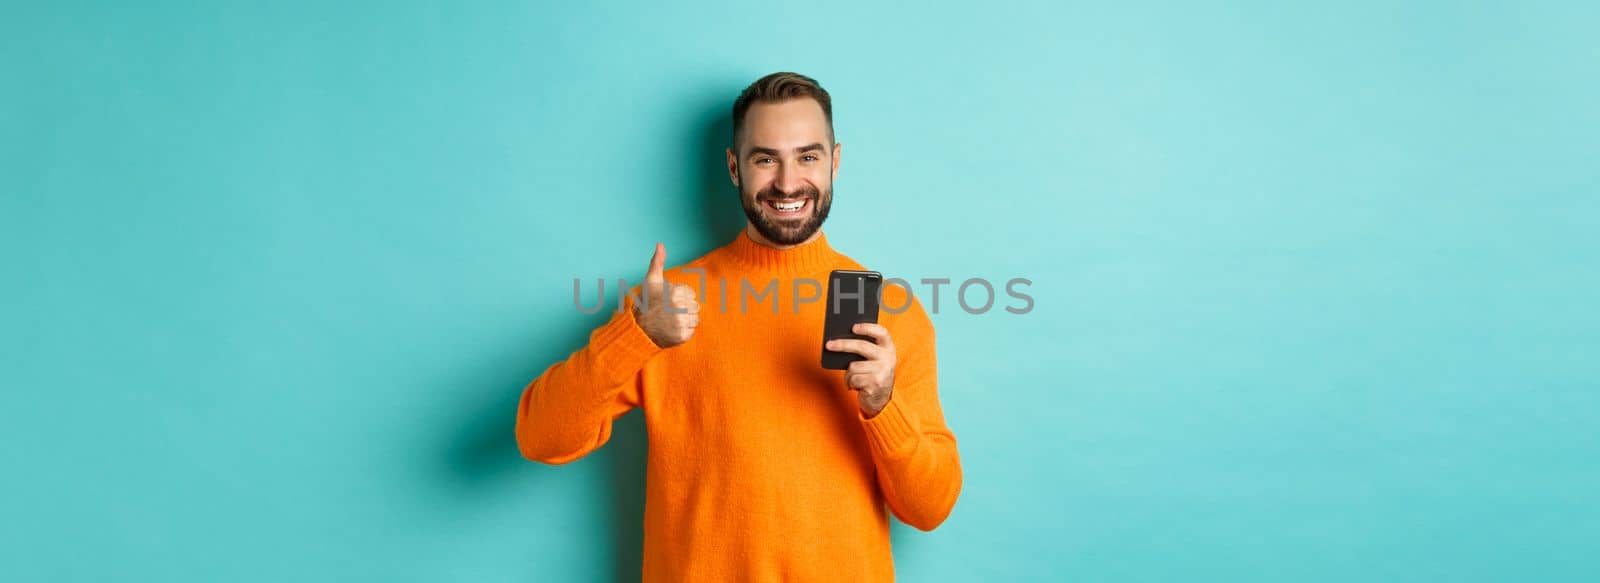 Photo of satisfied young man in orange sweater, showing thumb-up after reading on mobile phone, standing pleased against turquoise background.